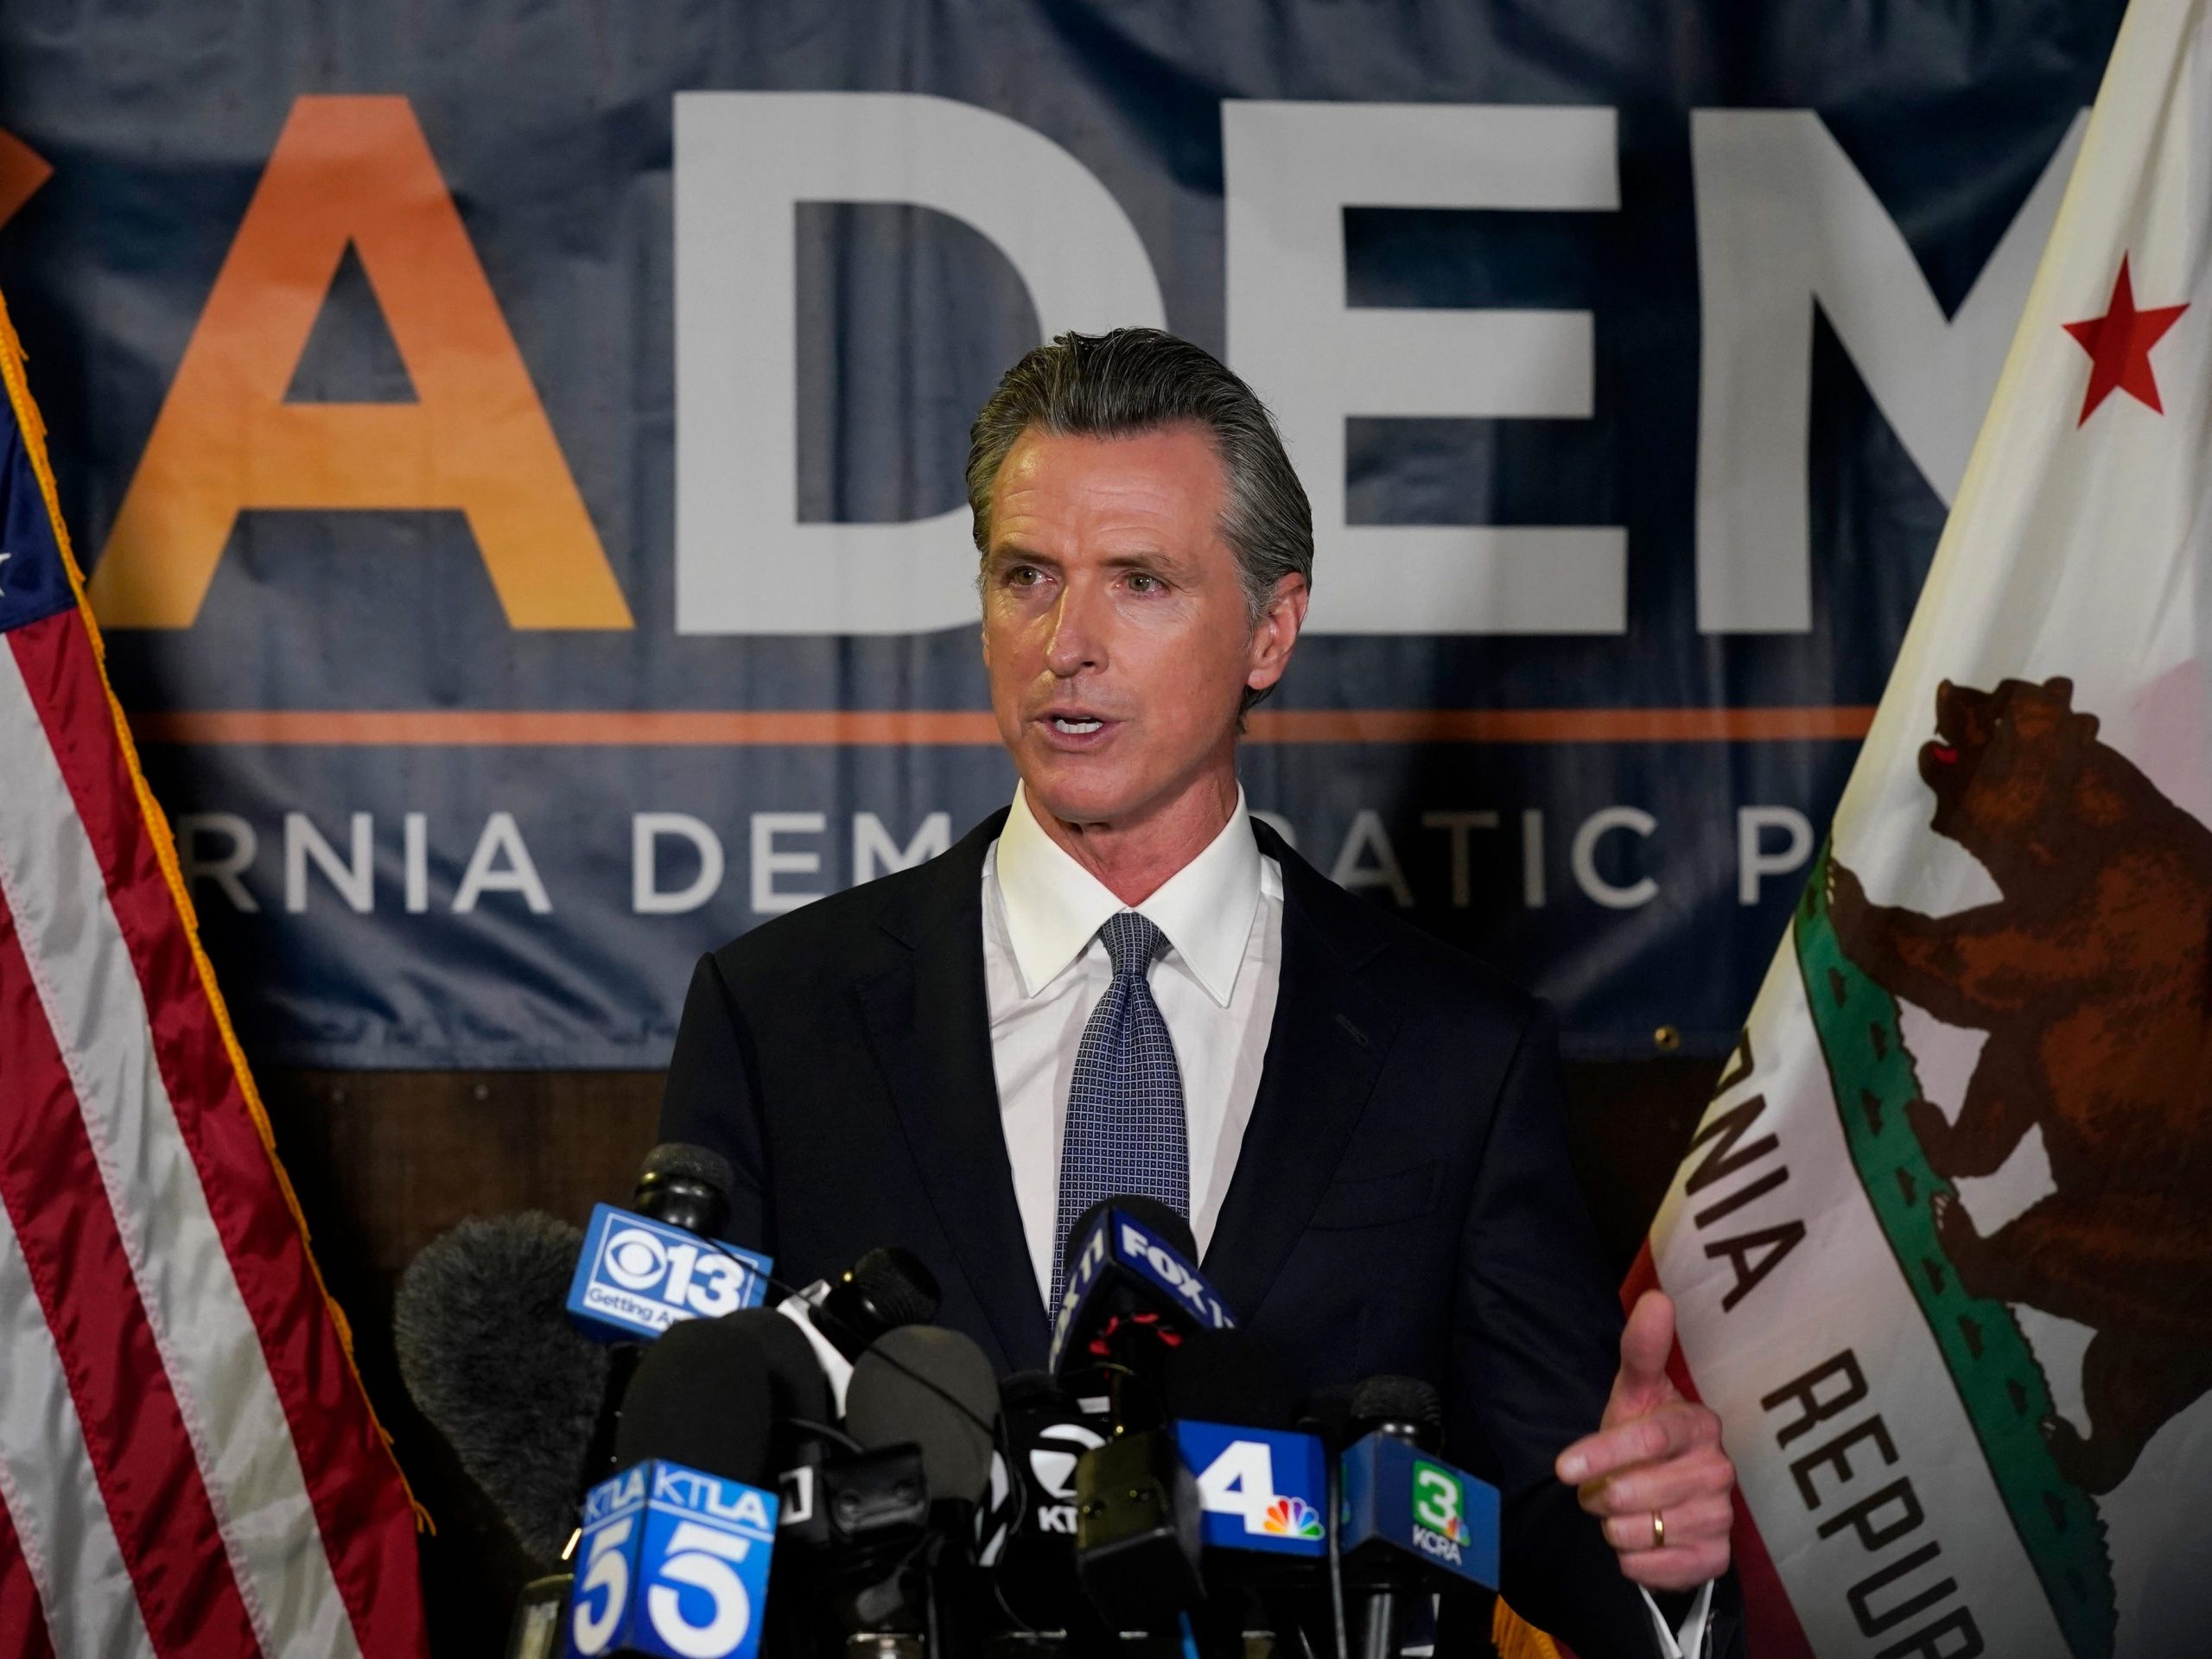 California Gov. Gavin Newsom addresses reporters after beating back the recall attempt that aimed to remove him from office, at the John L. Burton California Democratic Party headquarters in Sacramento, Calif., Tuesday, Sept. 14, 2021.